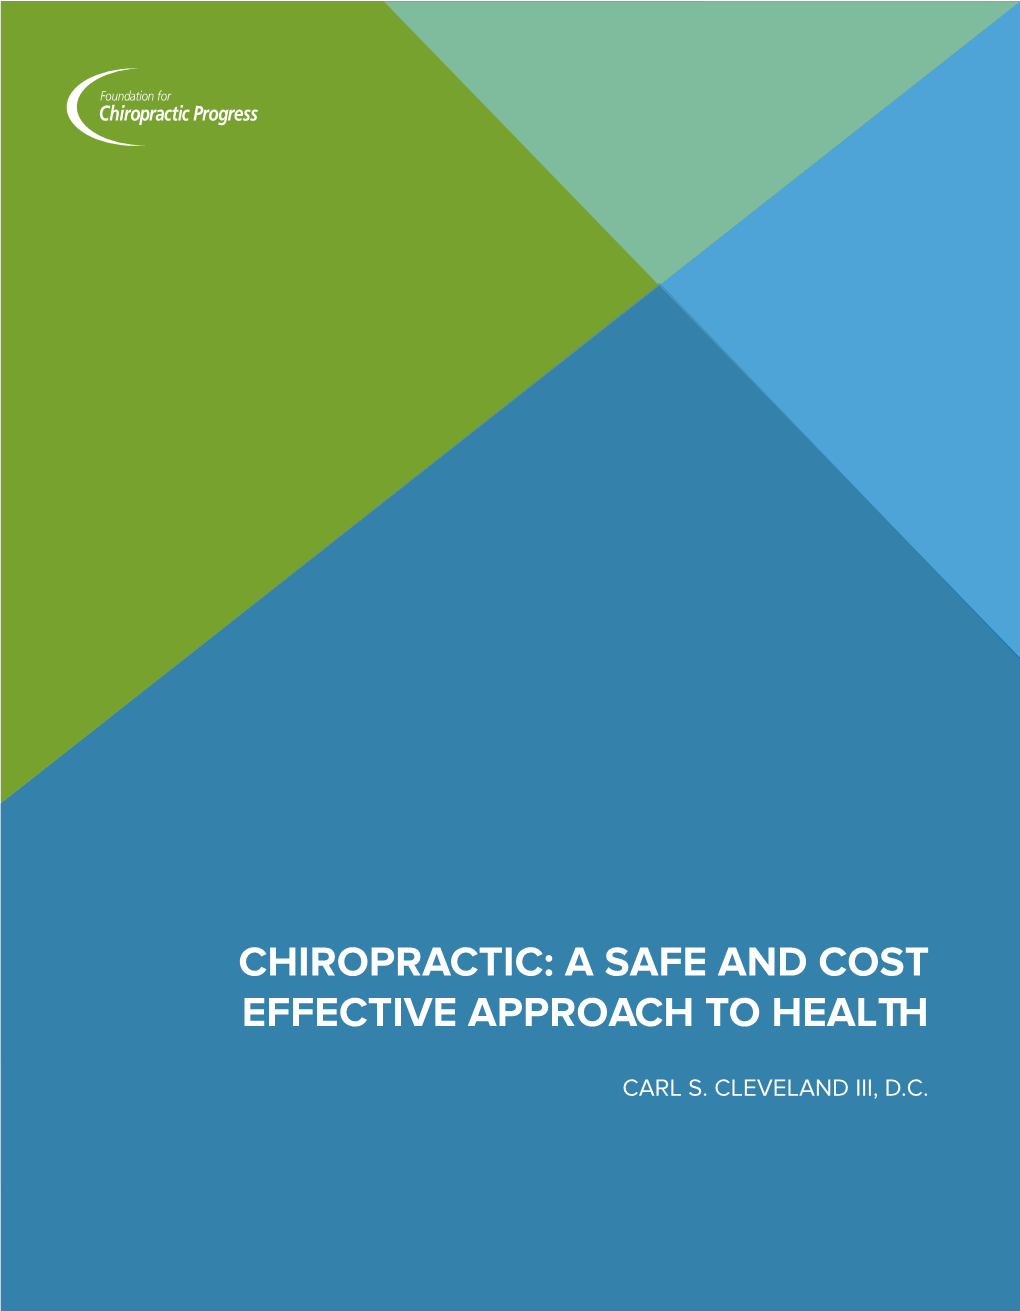 Chiropractic: a Safe and Cost Effective Approach to Health